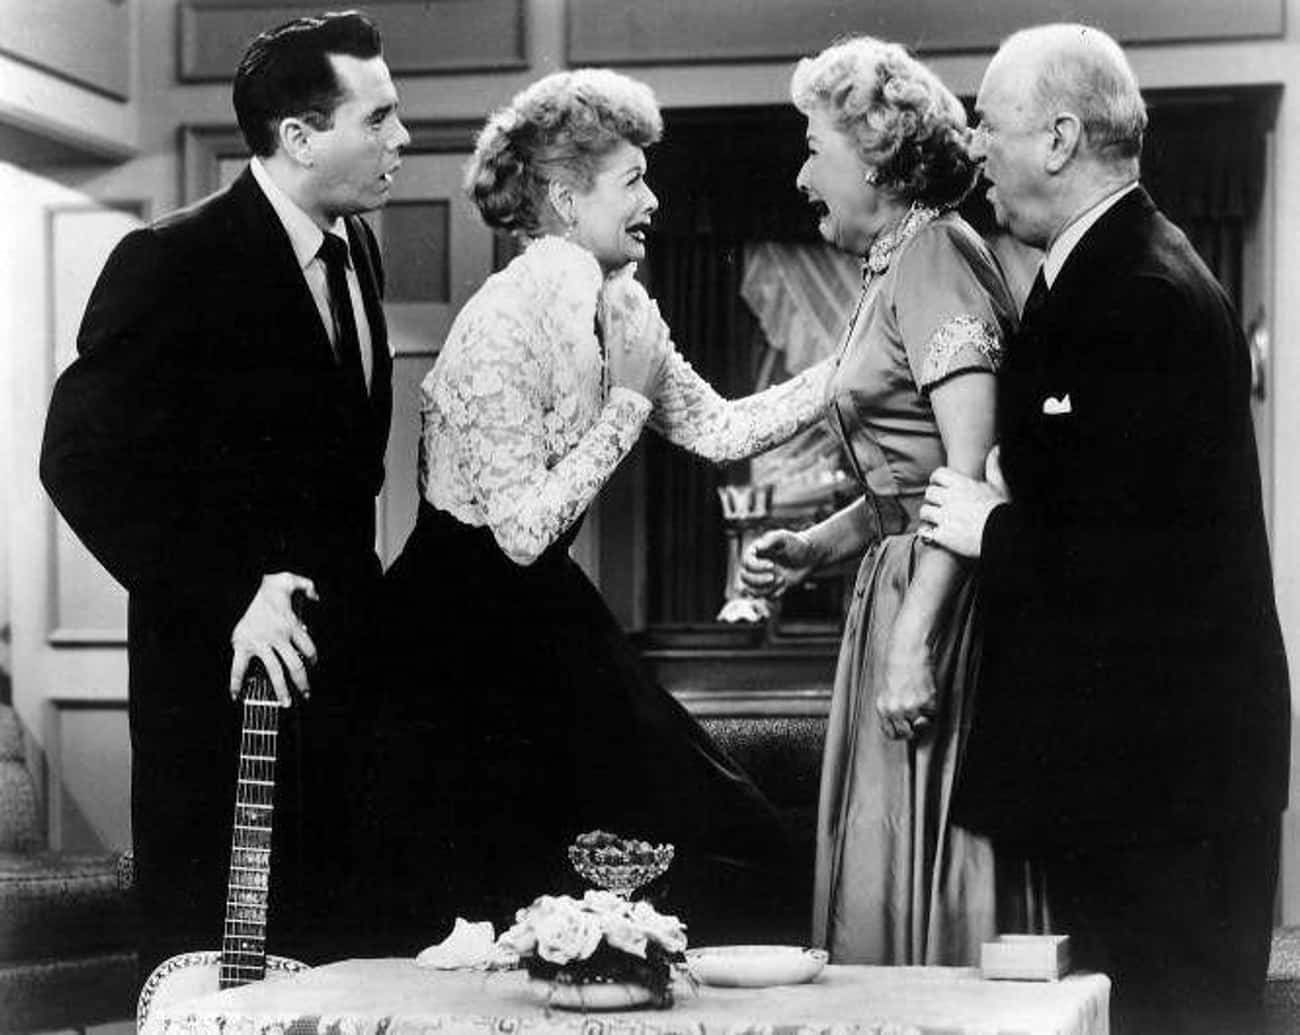 Lucille Ball And Desi Arnaz Refused To Move To New York, So CBS Got Creative